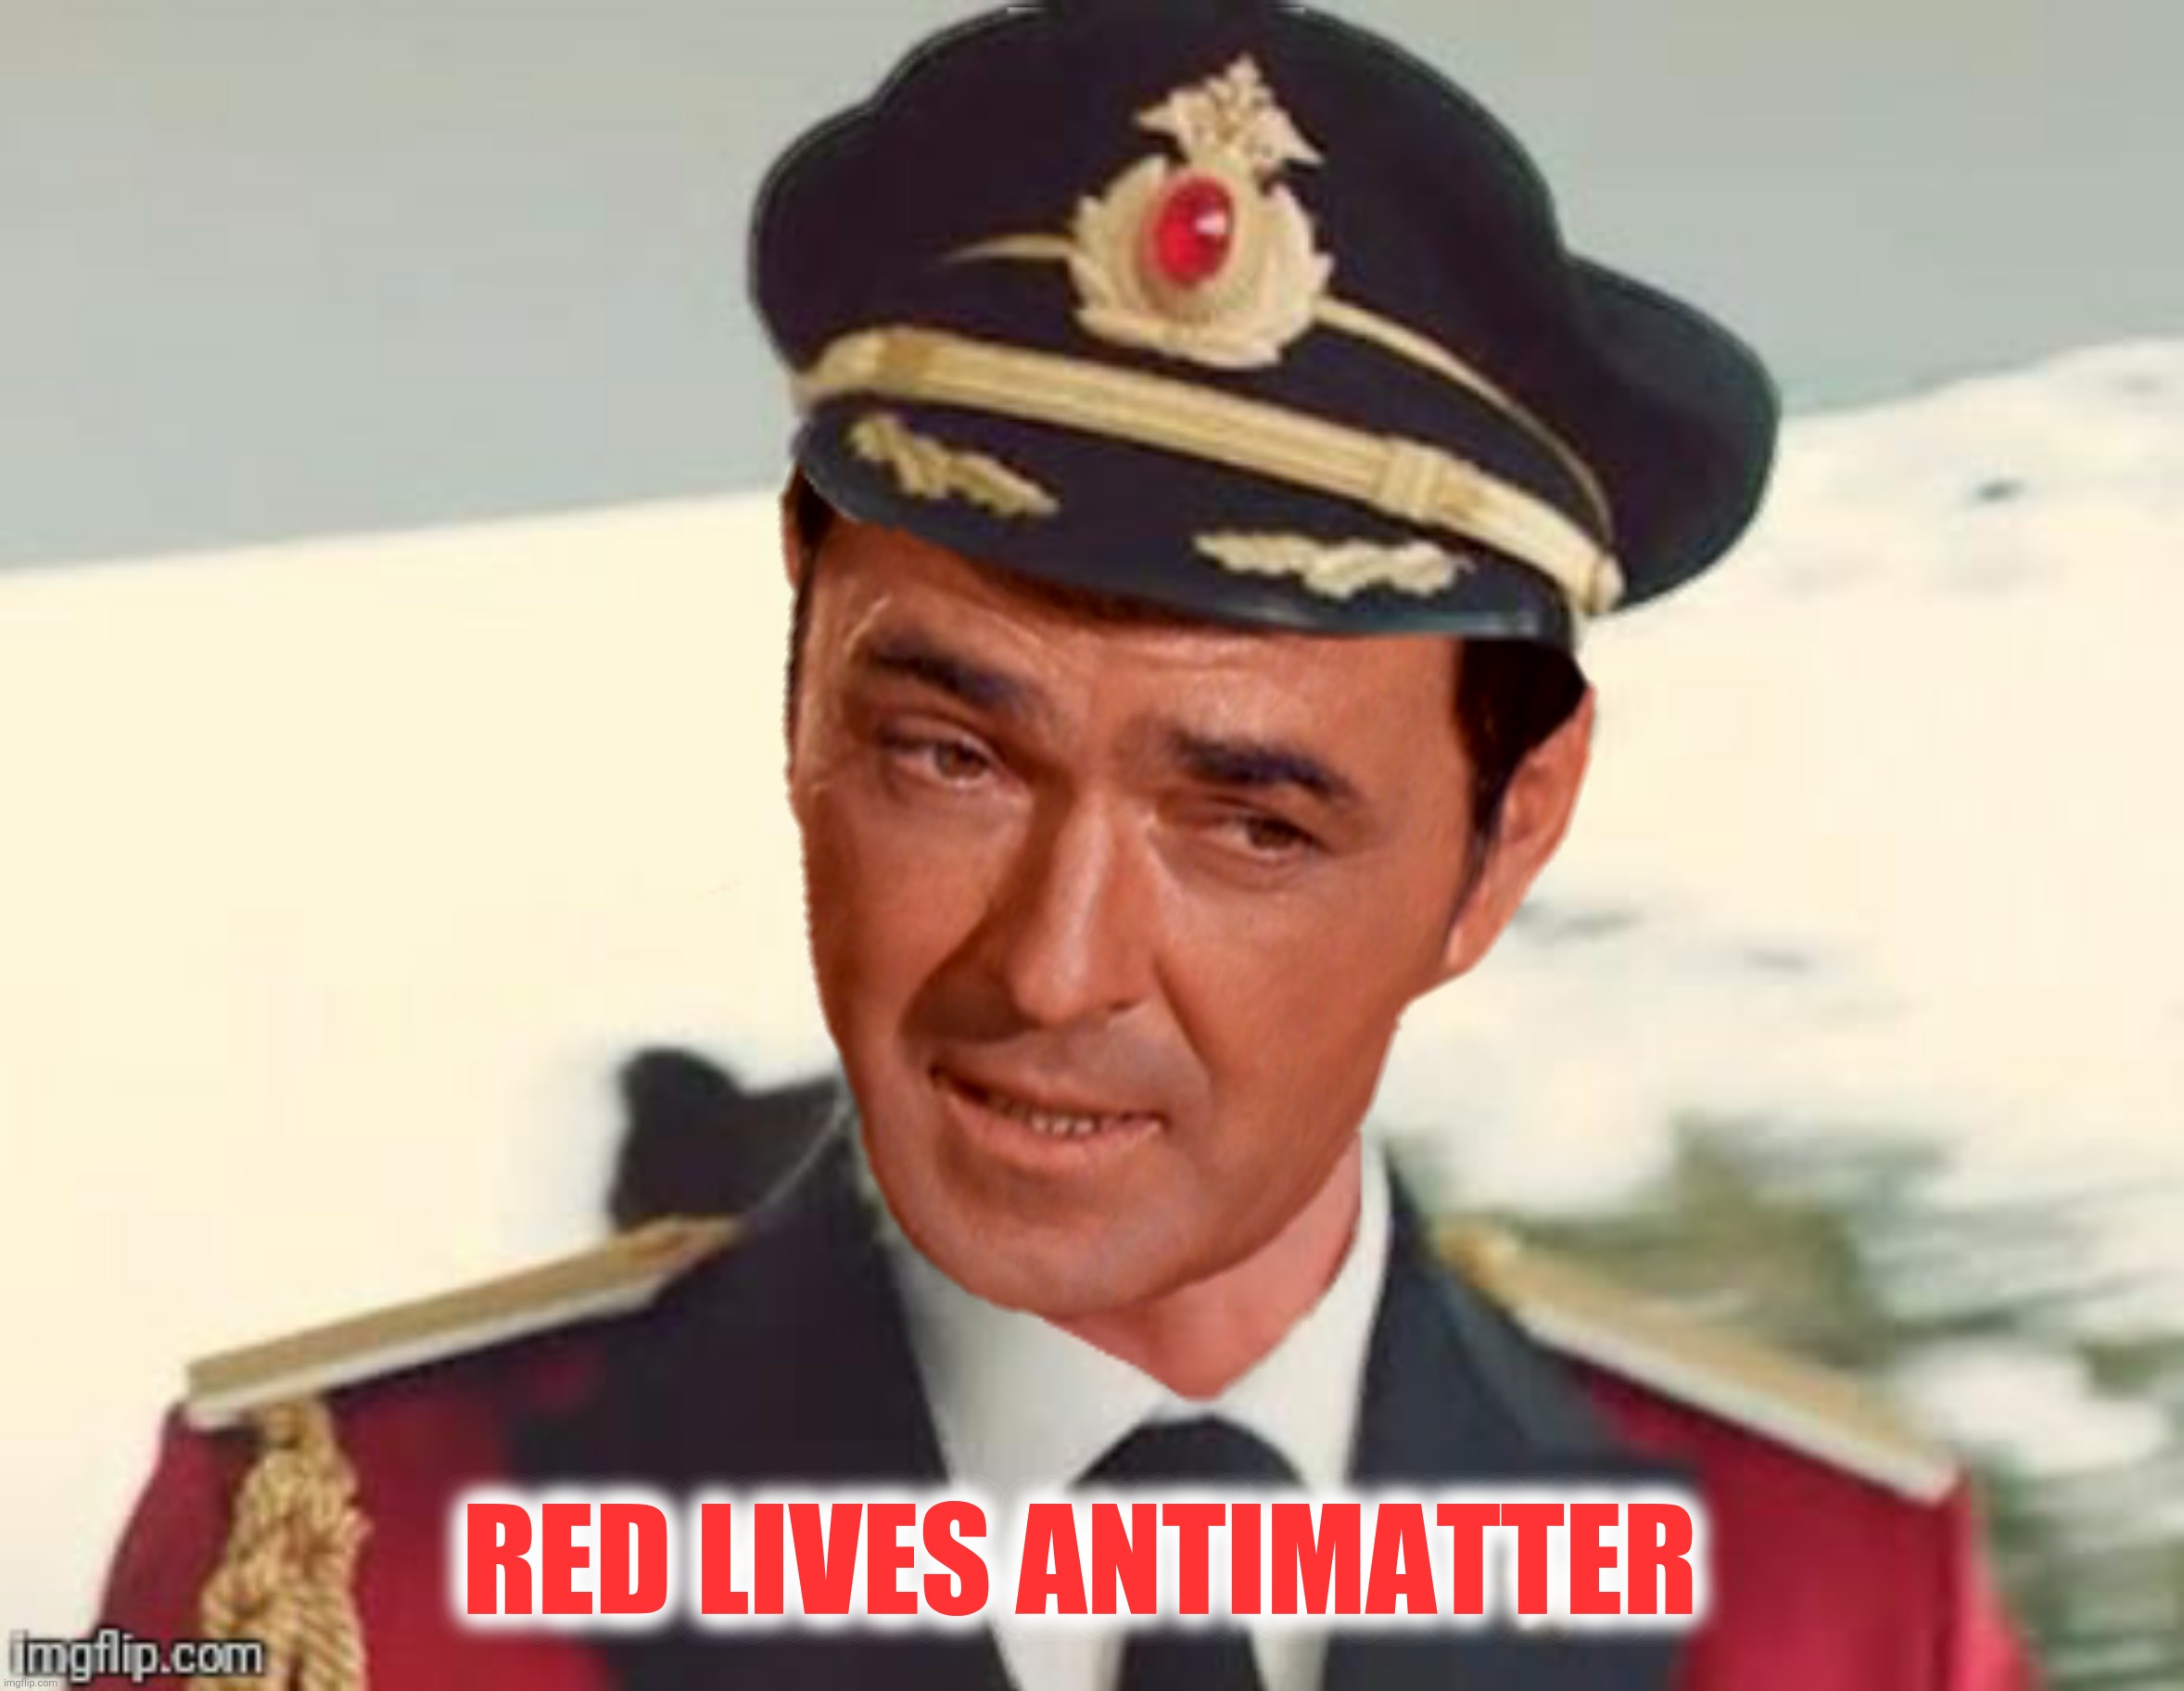 Chief Engineer Obvious | RED LIVES ANTIMATTER | image tagged in bad photoshop,star trek,star trek scotty,captain obvious,star trek red shirts | made w/ Imgflip meme maker